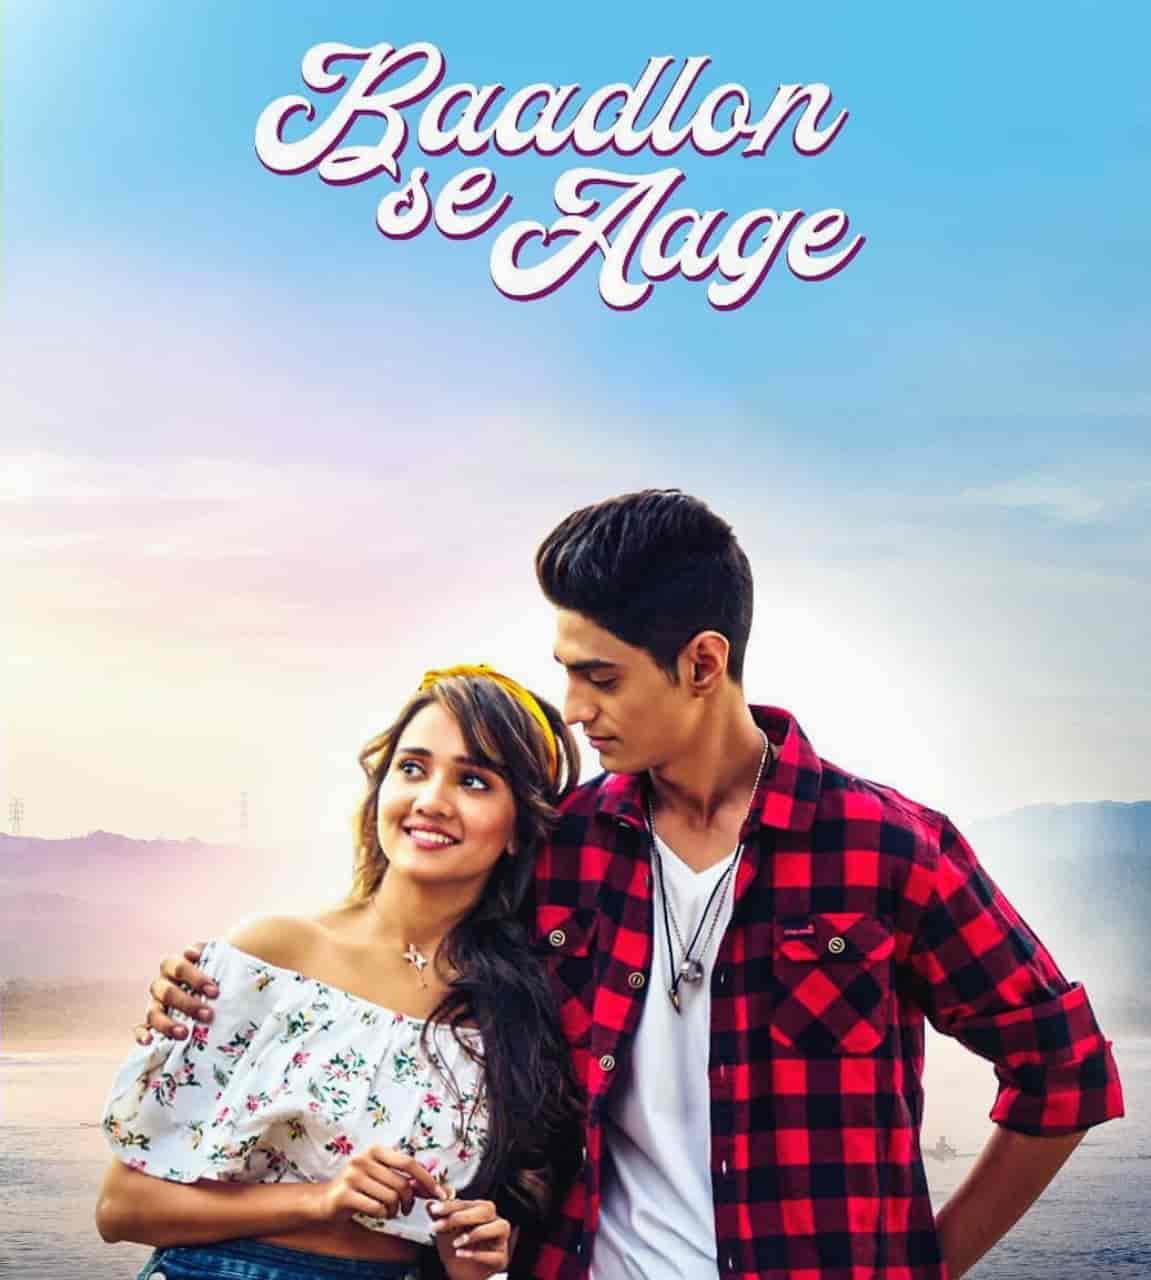 Baadlon Se Aage Non Film Hindi Song Image Features Palak Muchhal And Palaash Muchhal